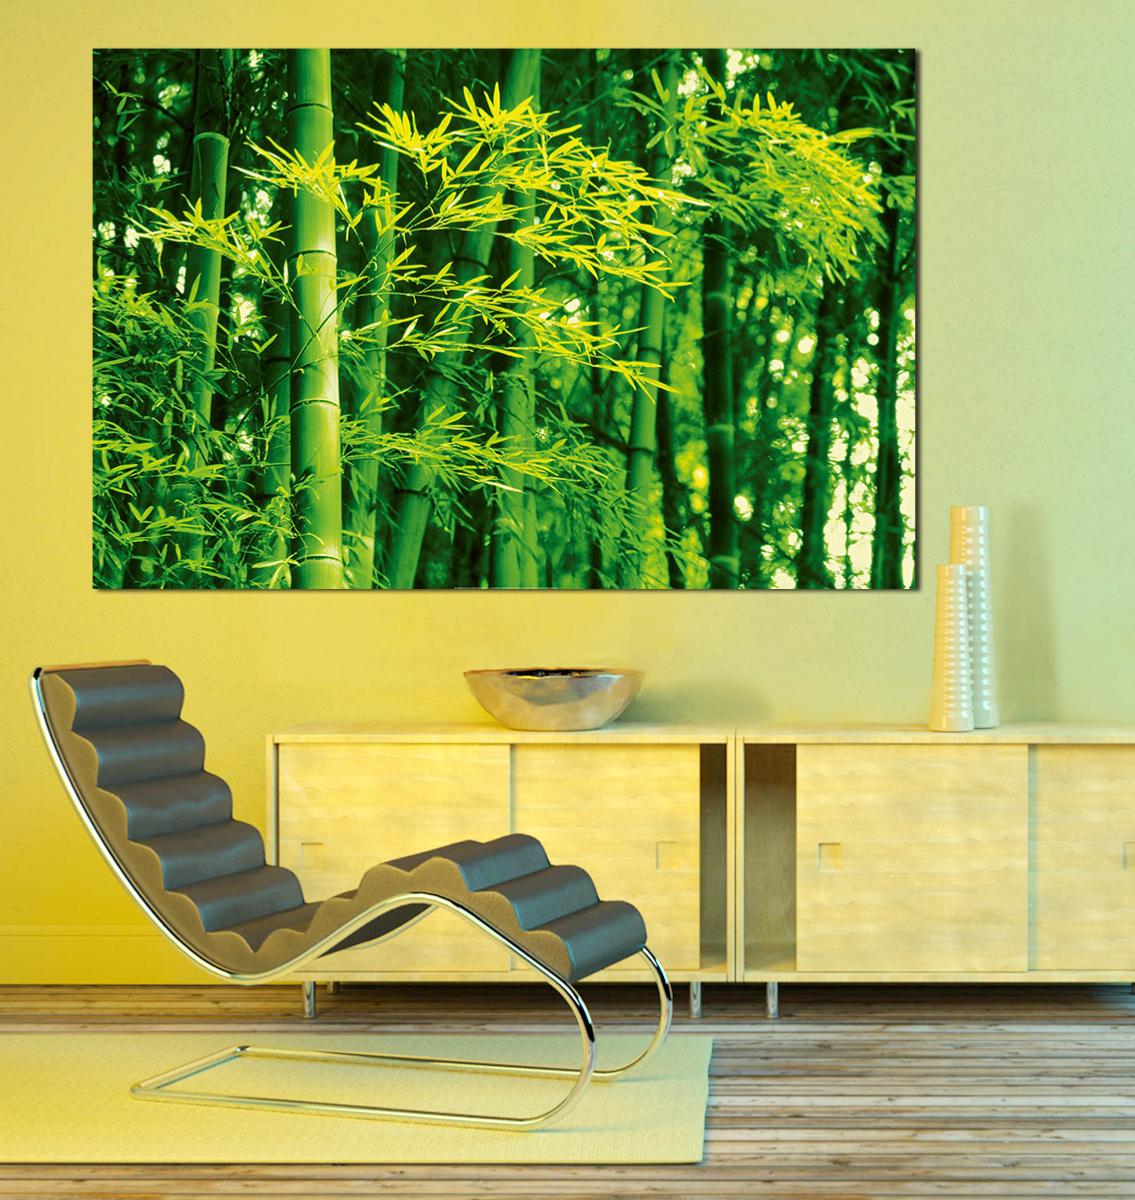 Poster XXL - Bamboo in Spring